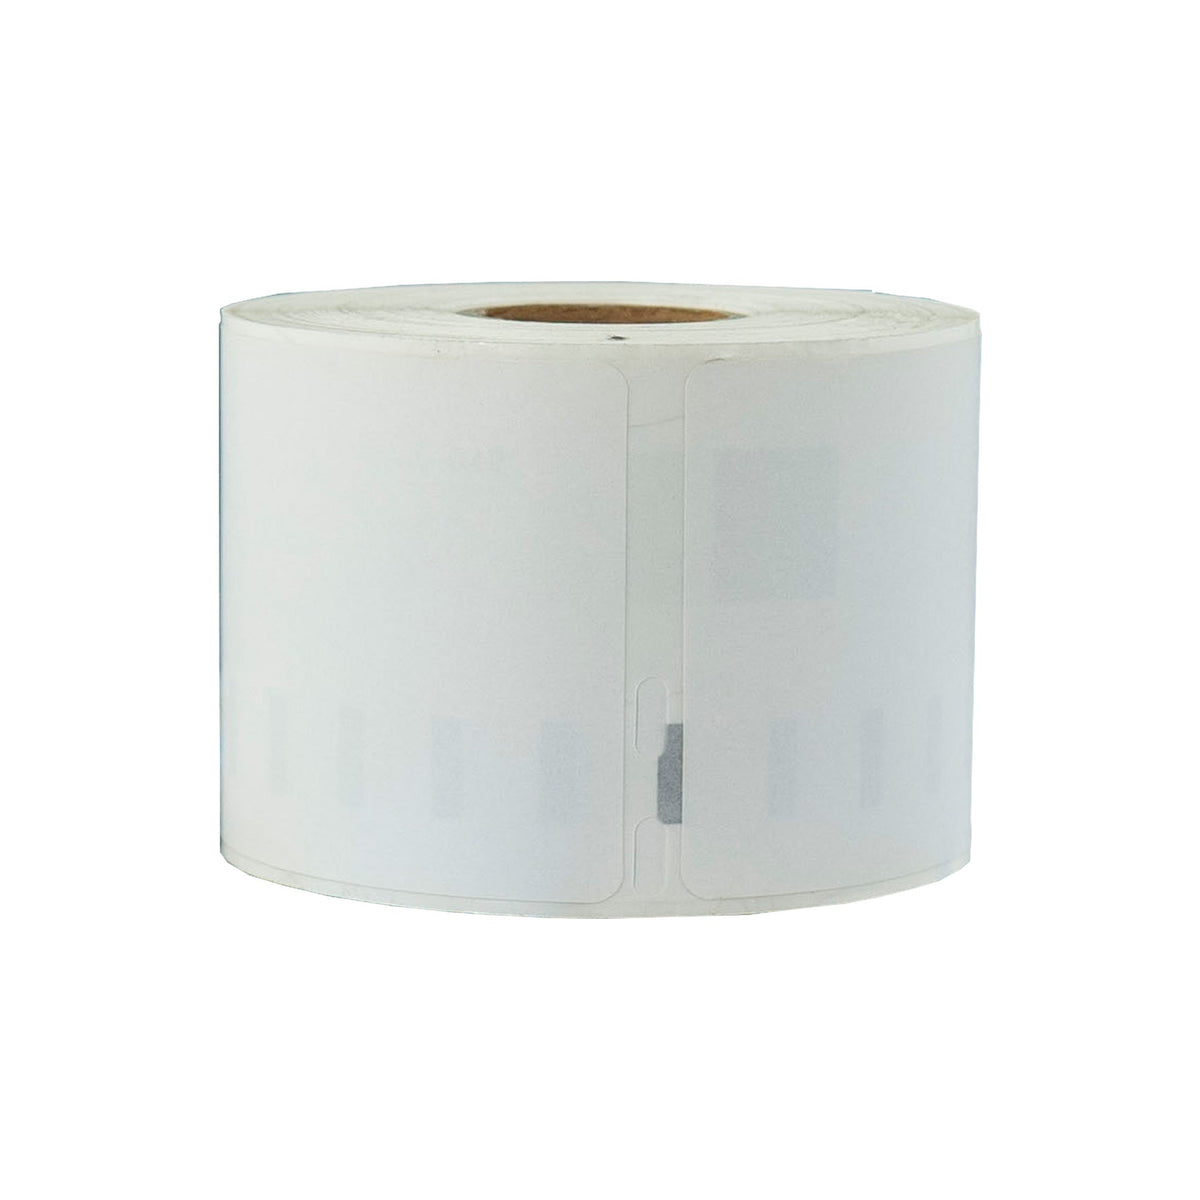 50mm x 100mm Direct Thermal Permanent Label, 500 Labels Per Roll, 25mm Core, Perforated-12 Rolls